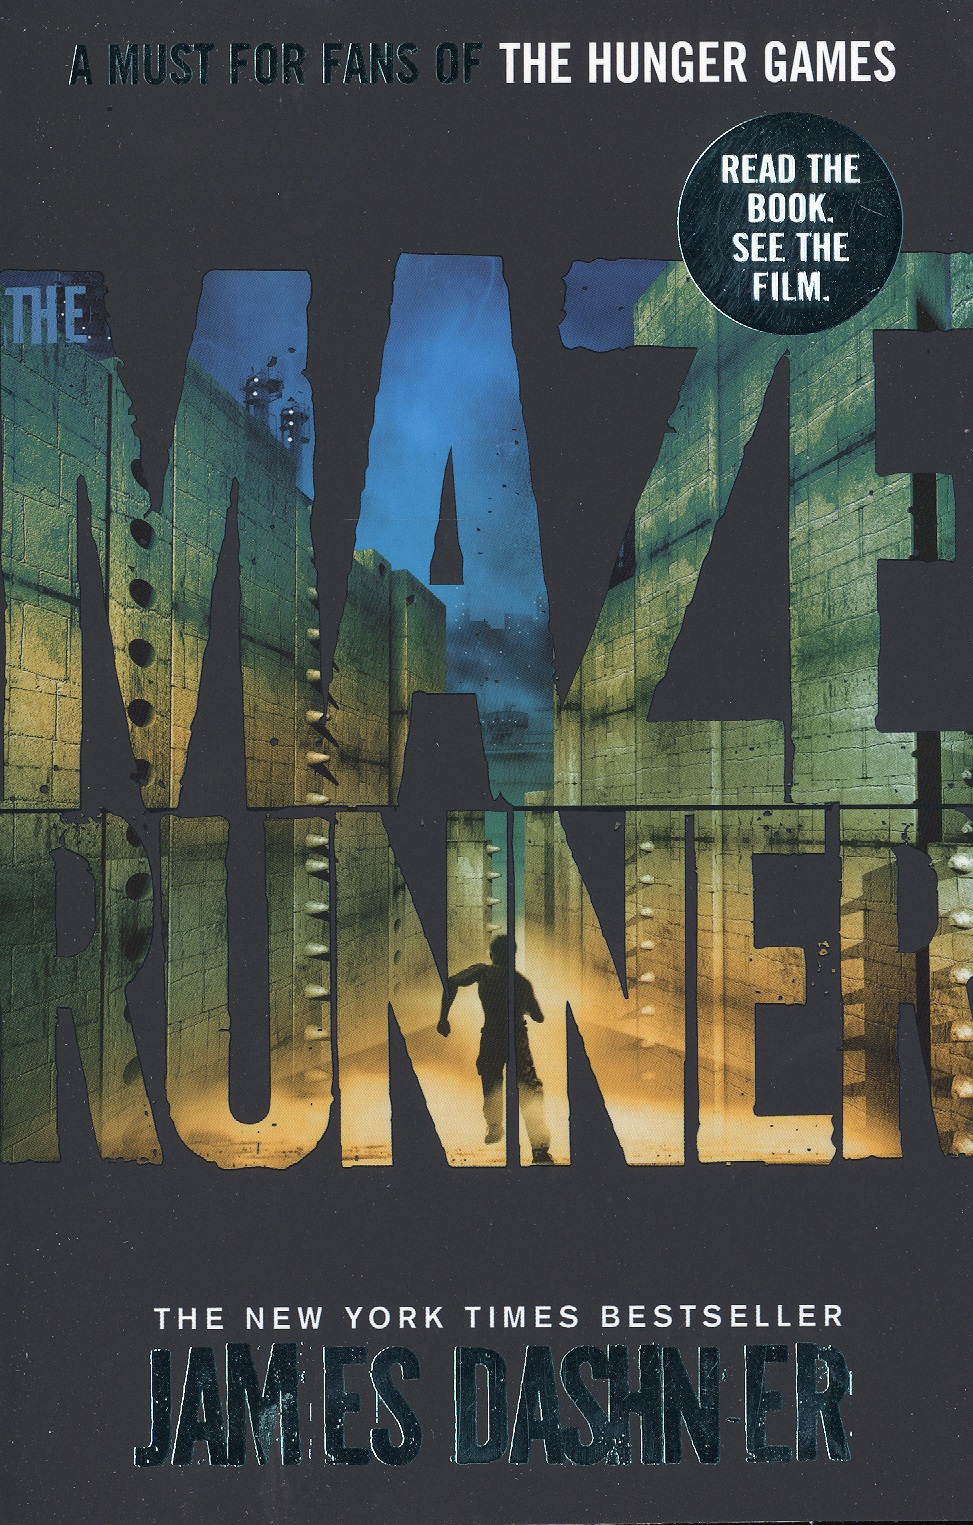 The Maze Runner erikson thomas surrounded by bad bosses and lazy employ